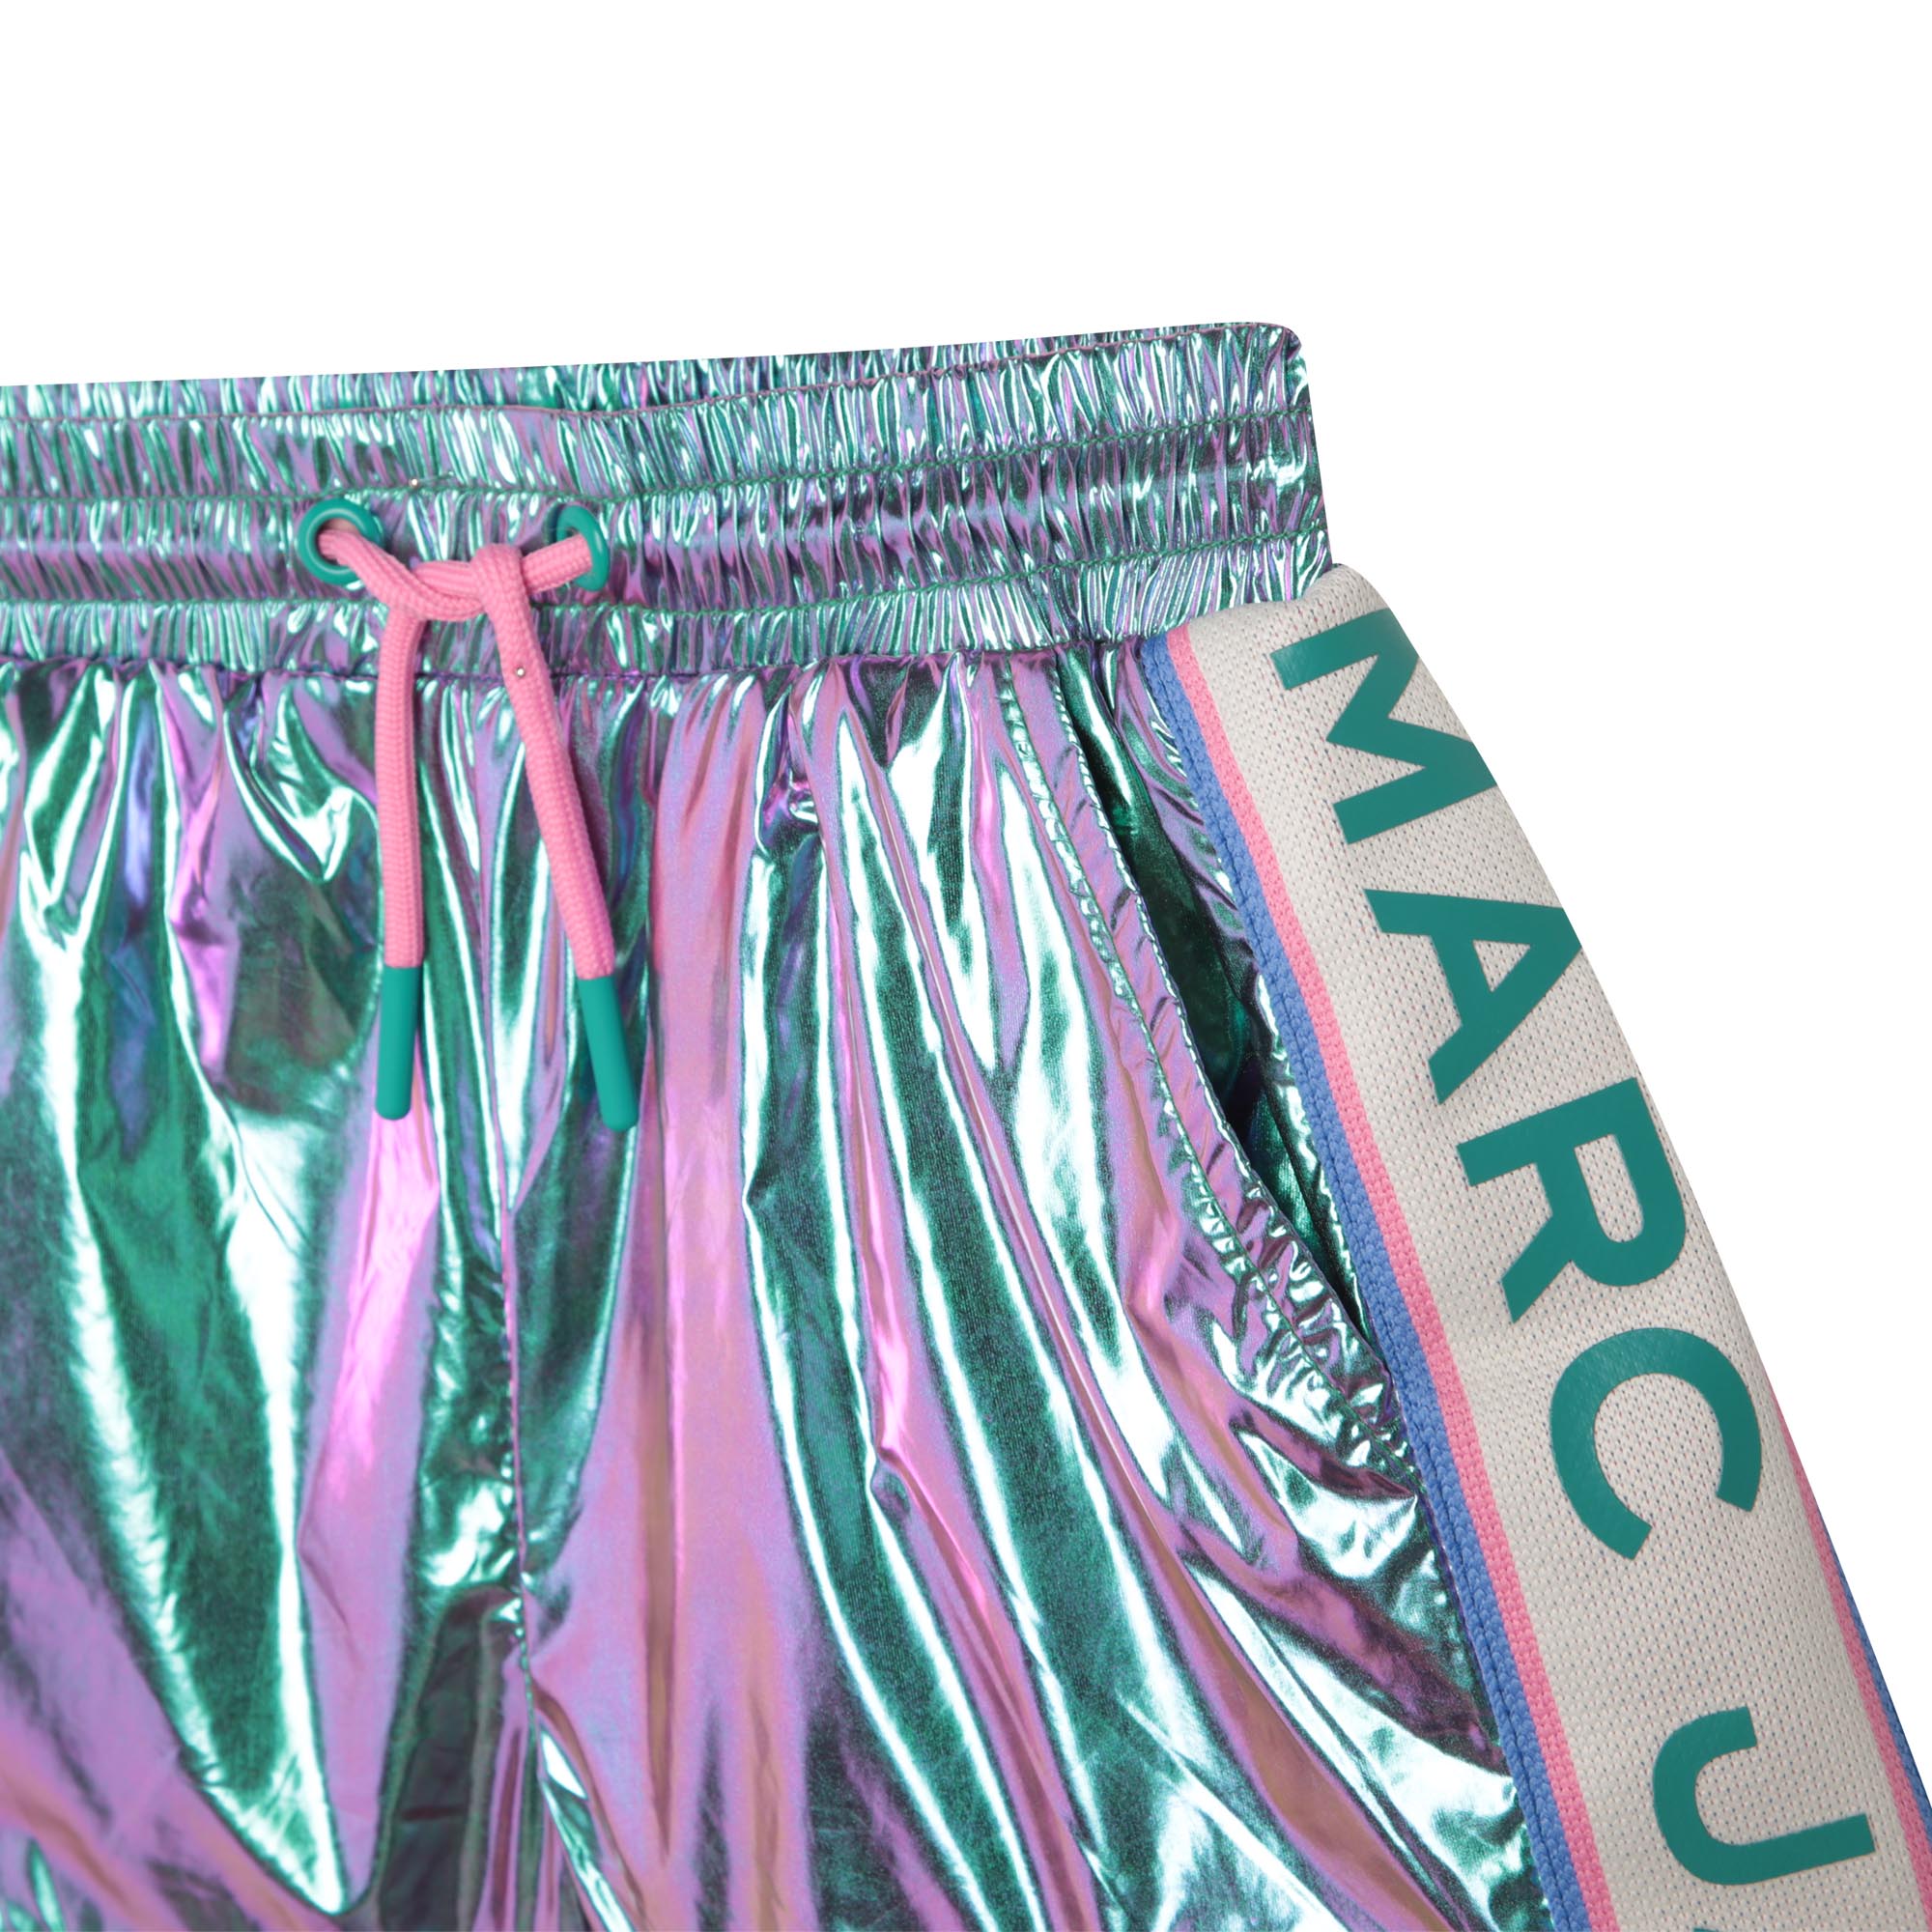 Shiny shorts with pockets MARC JACOBS for GIRL